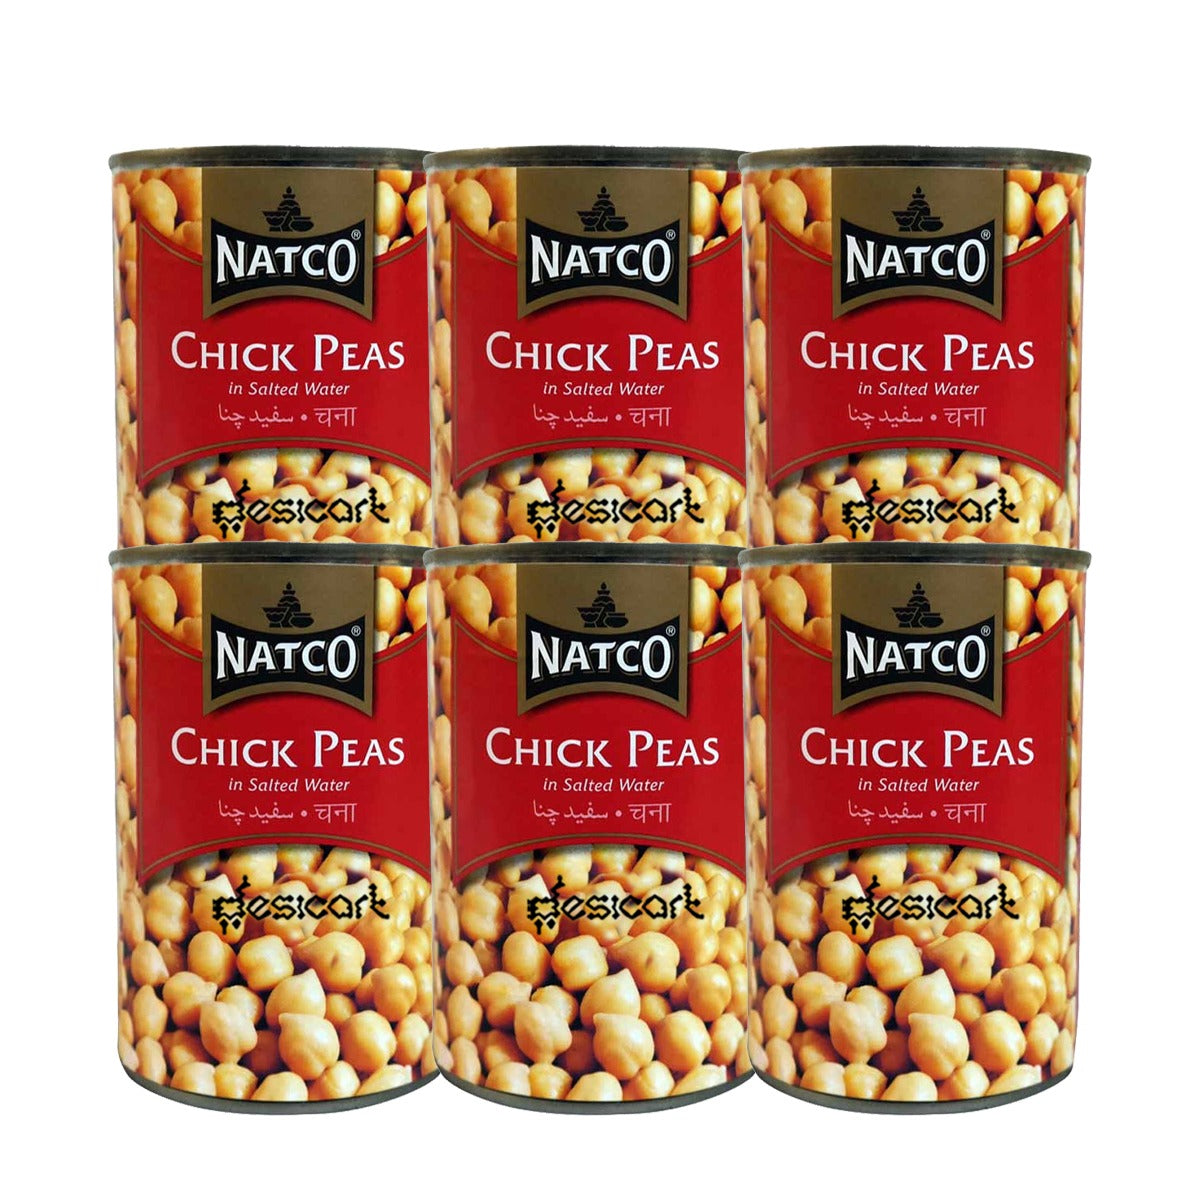 NATCO CHICK PEAS (T) (PACK OF 6) 400G